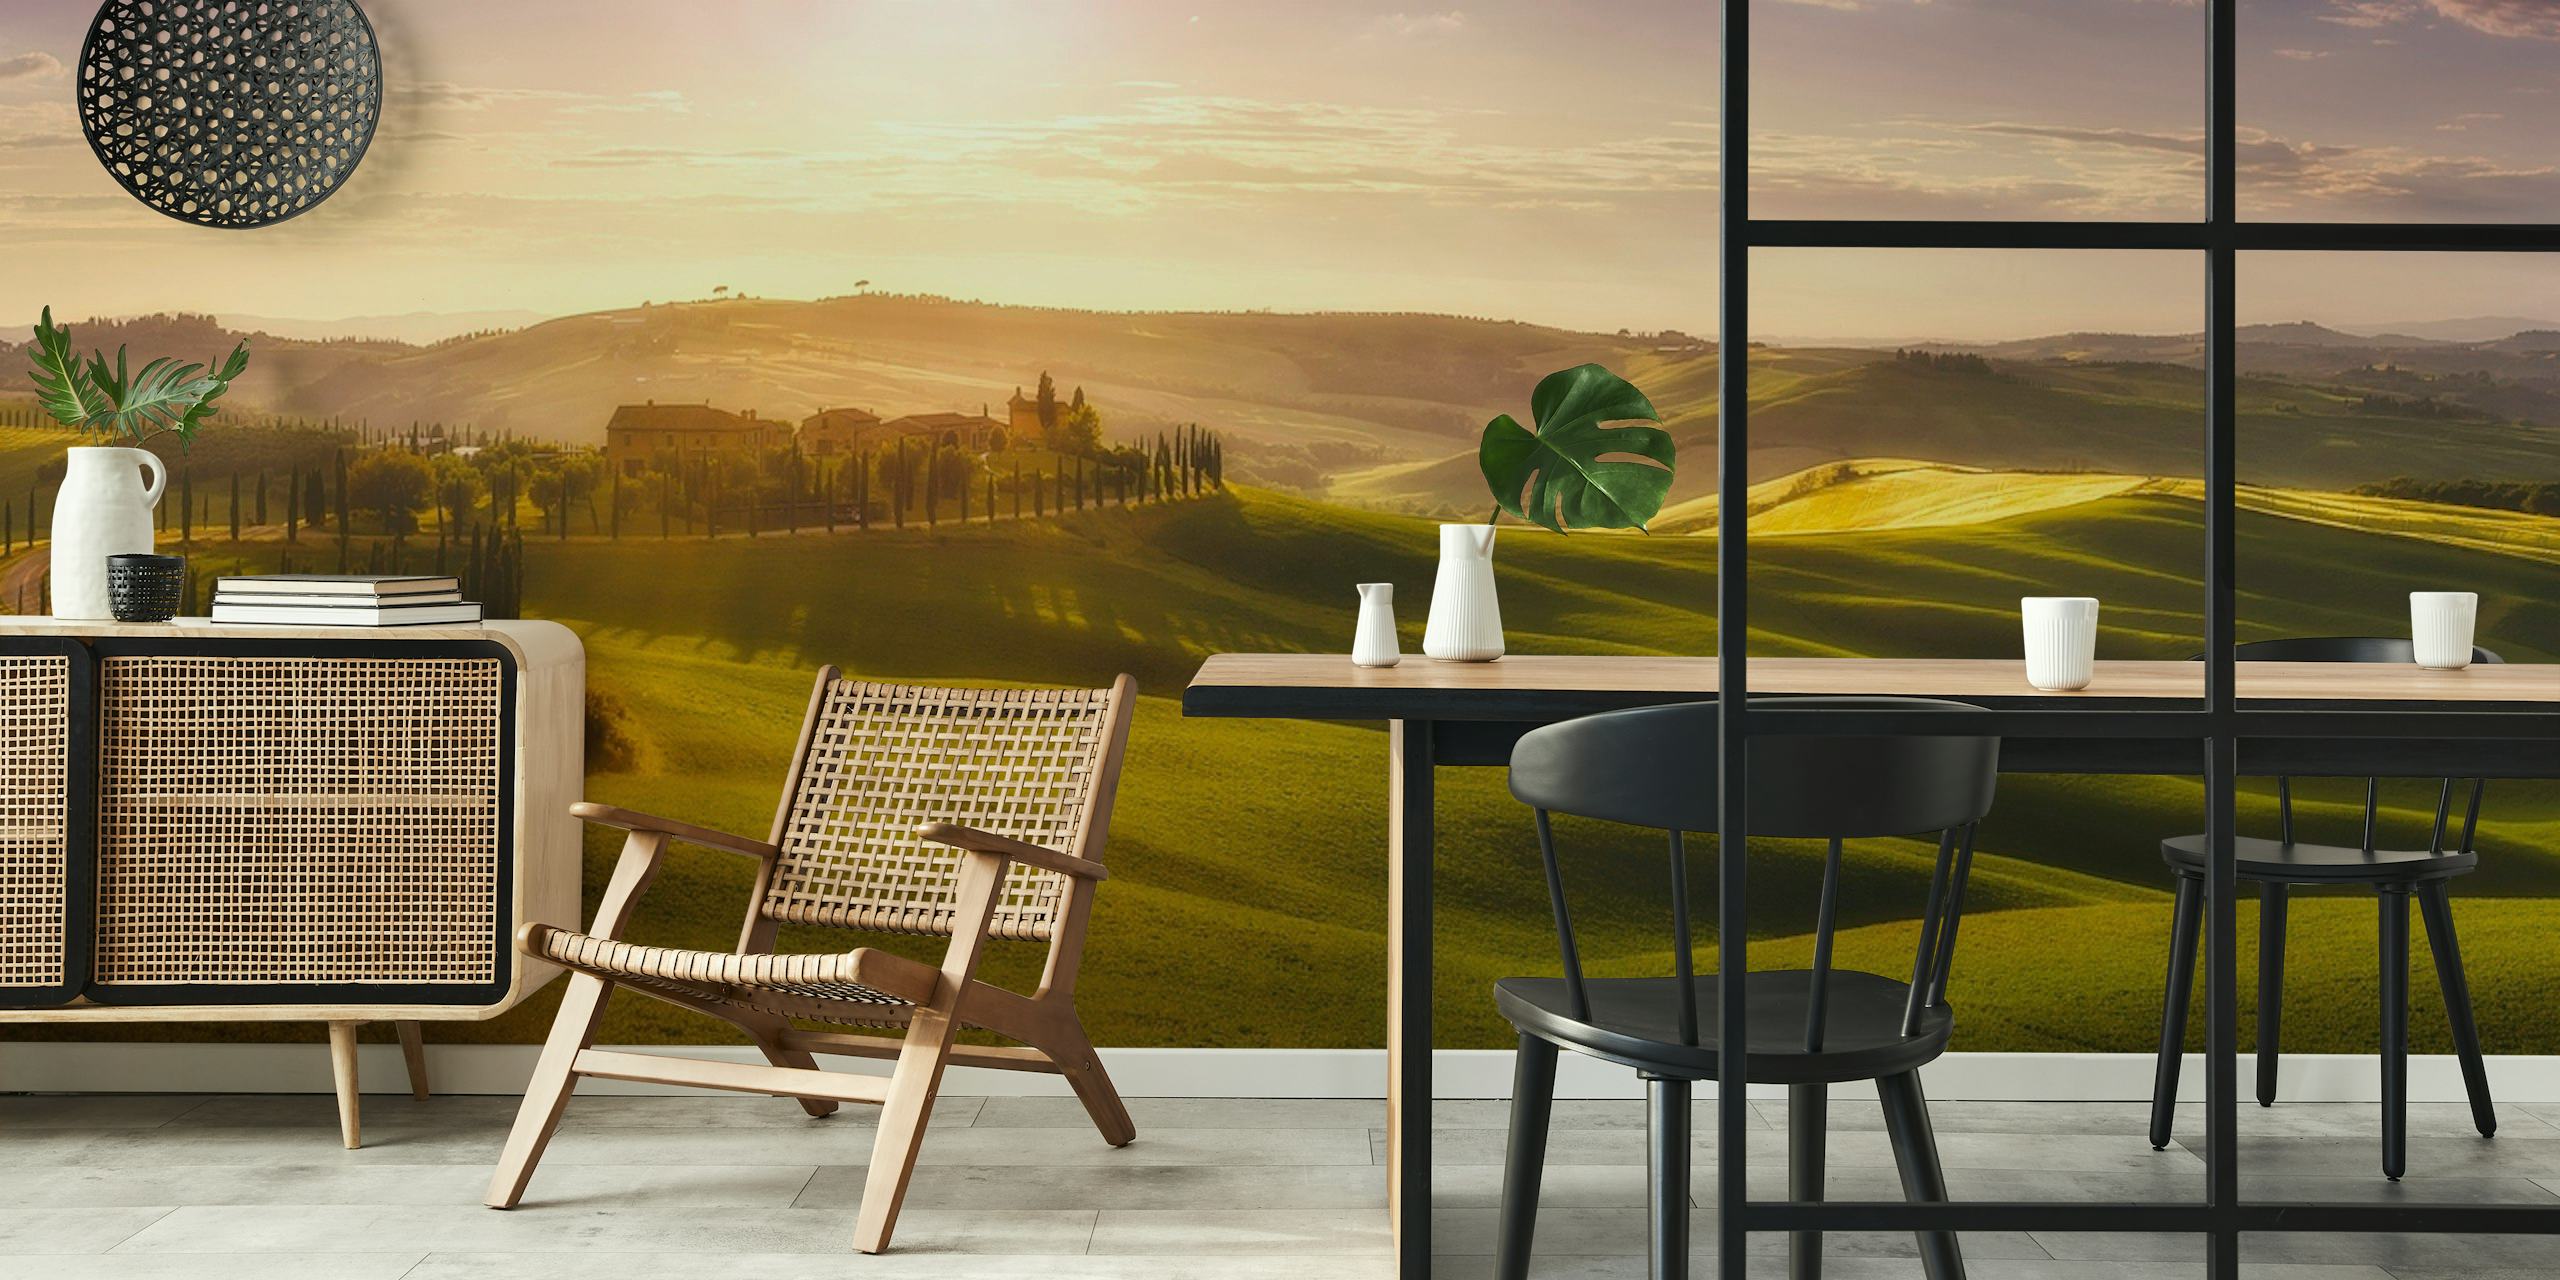 Panoramic wall mural depicting rolling hills under a glowing sky with hues of green and gold.